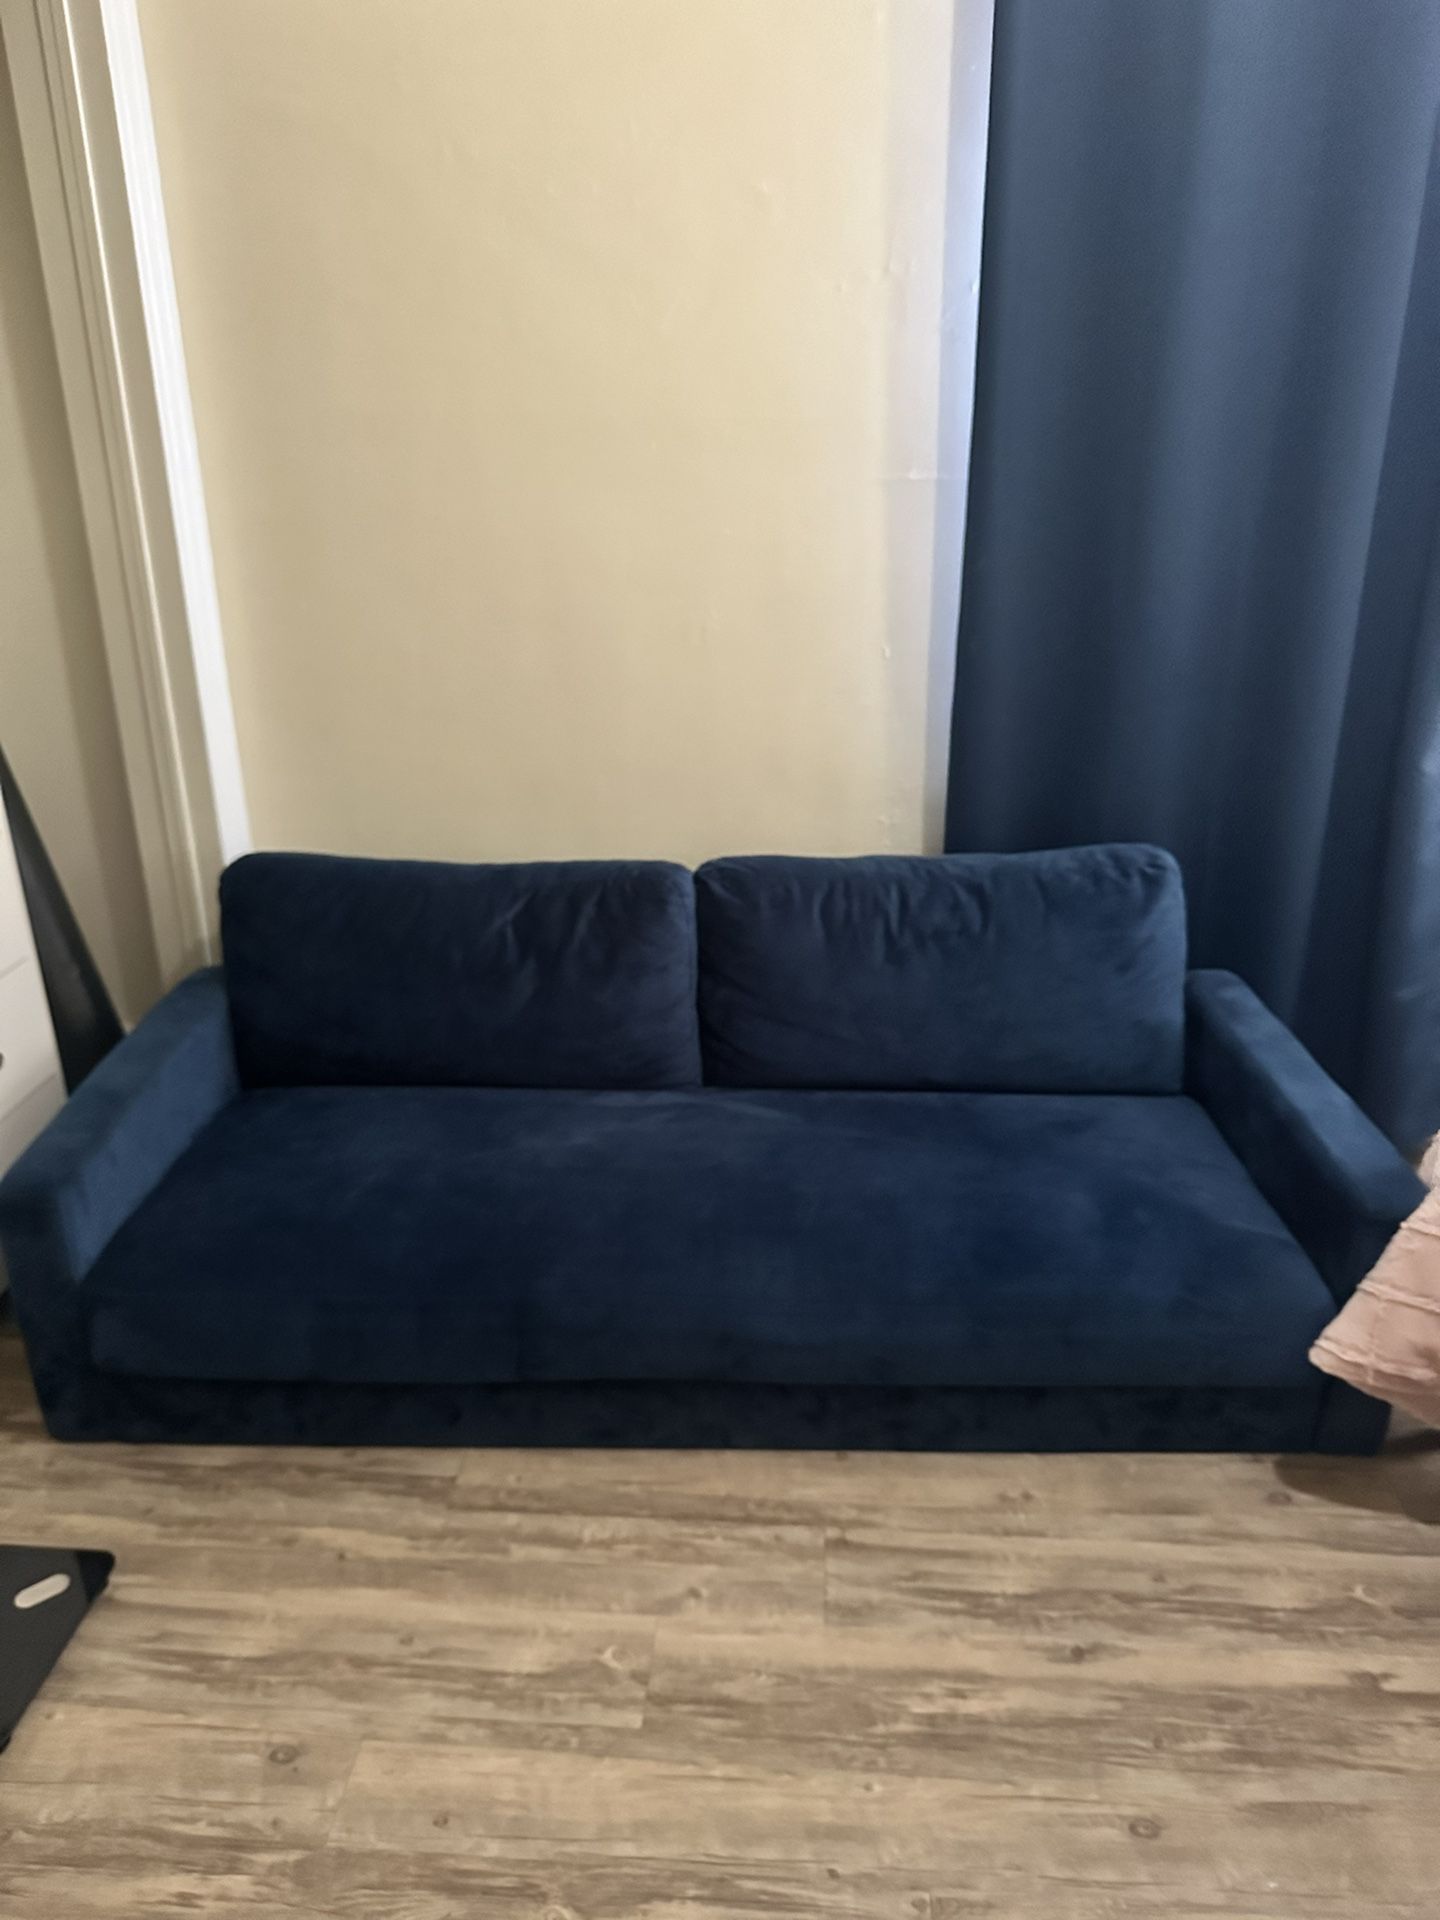 Blue Couch